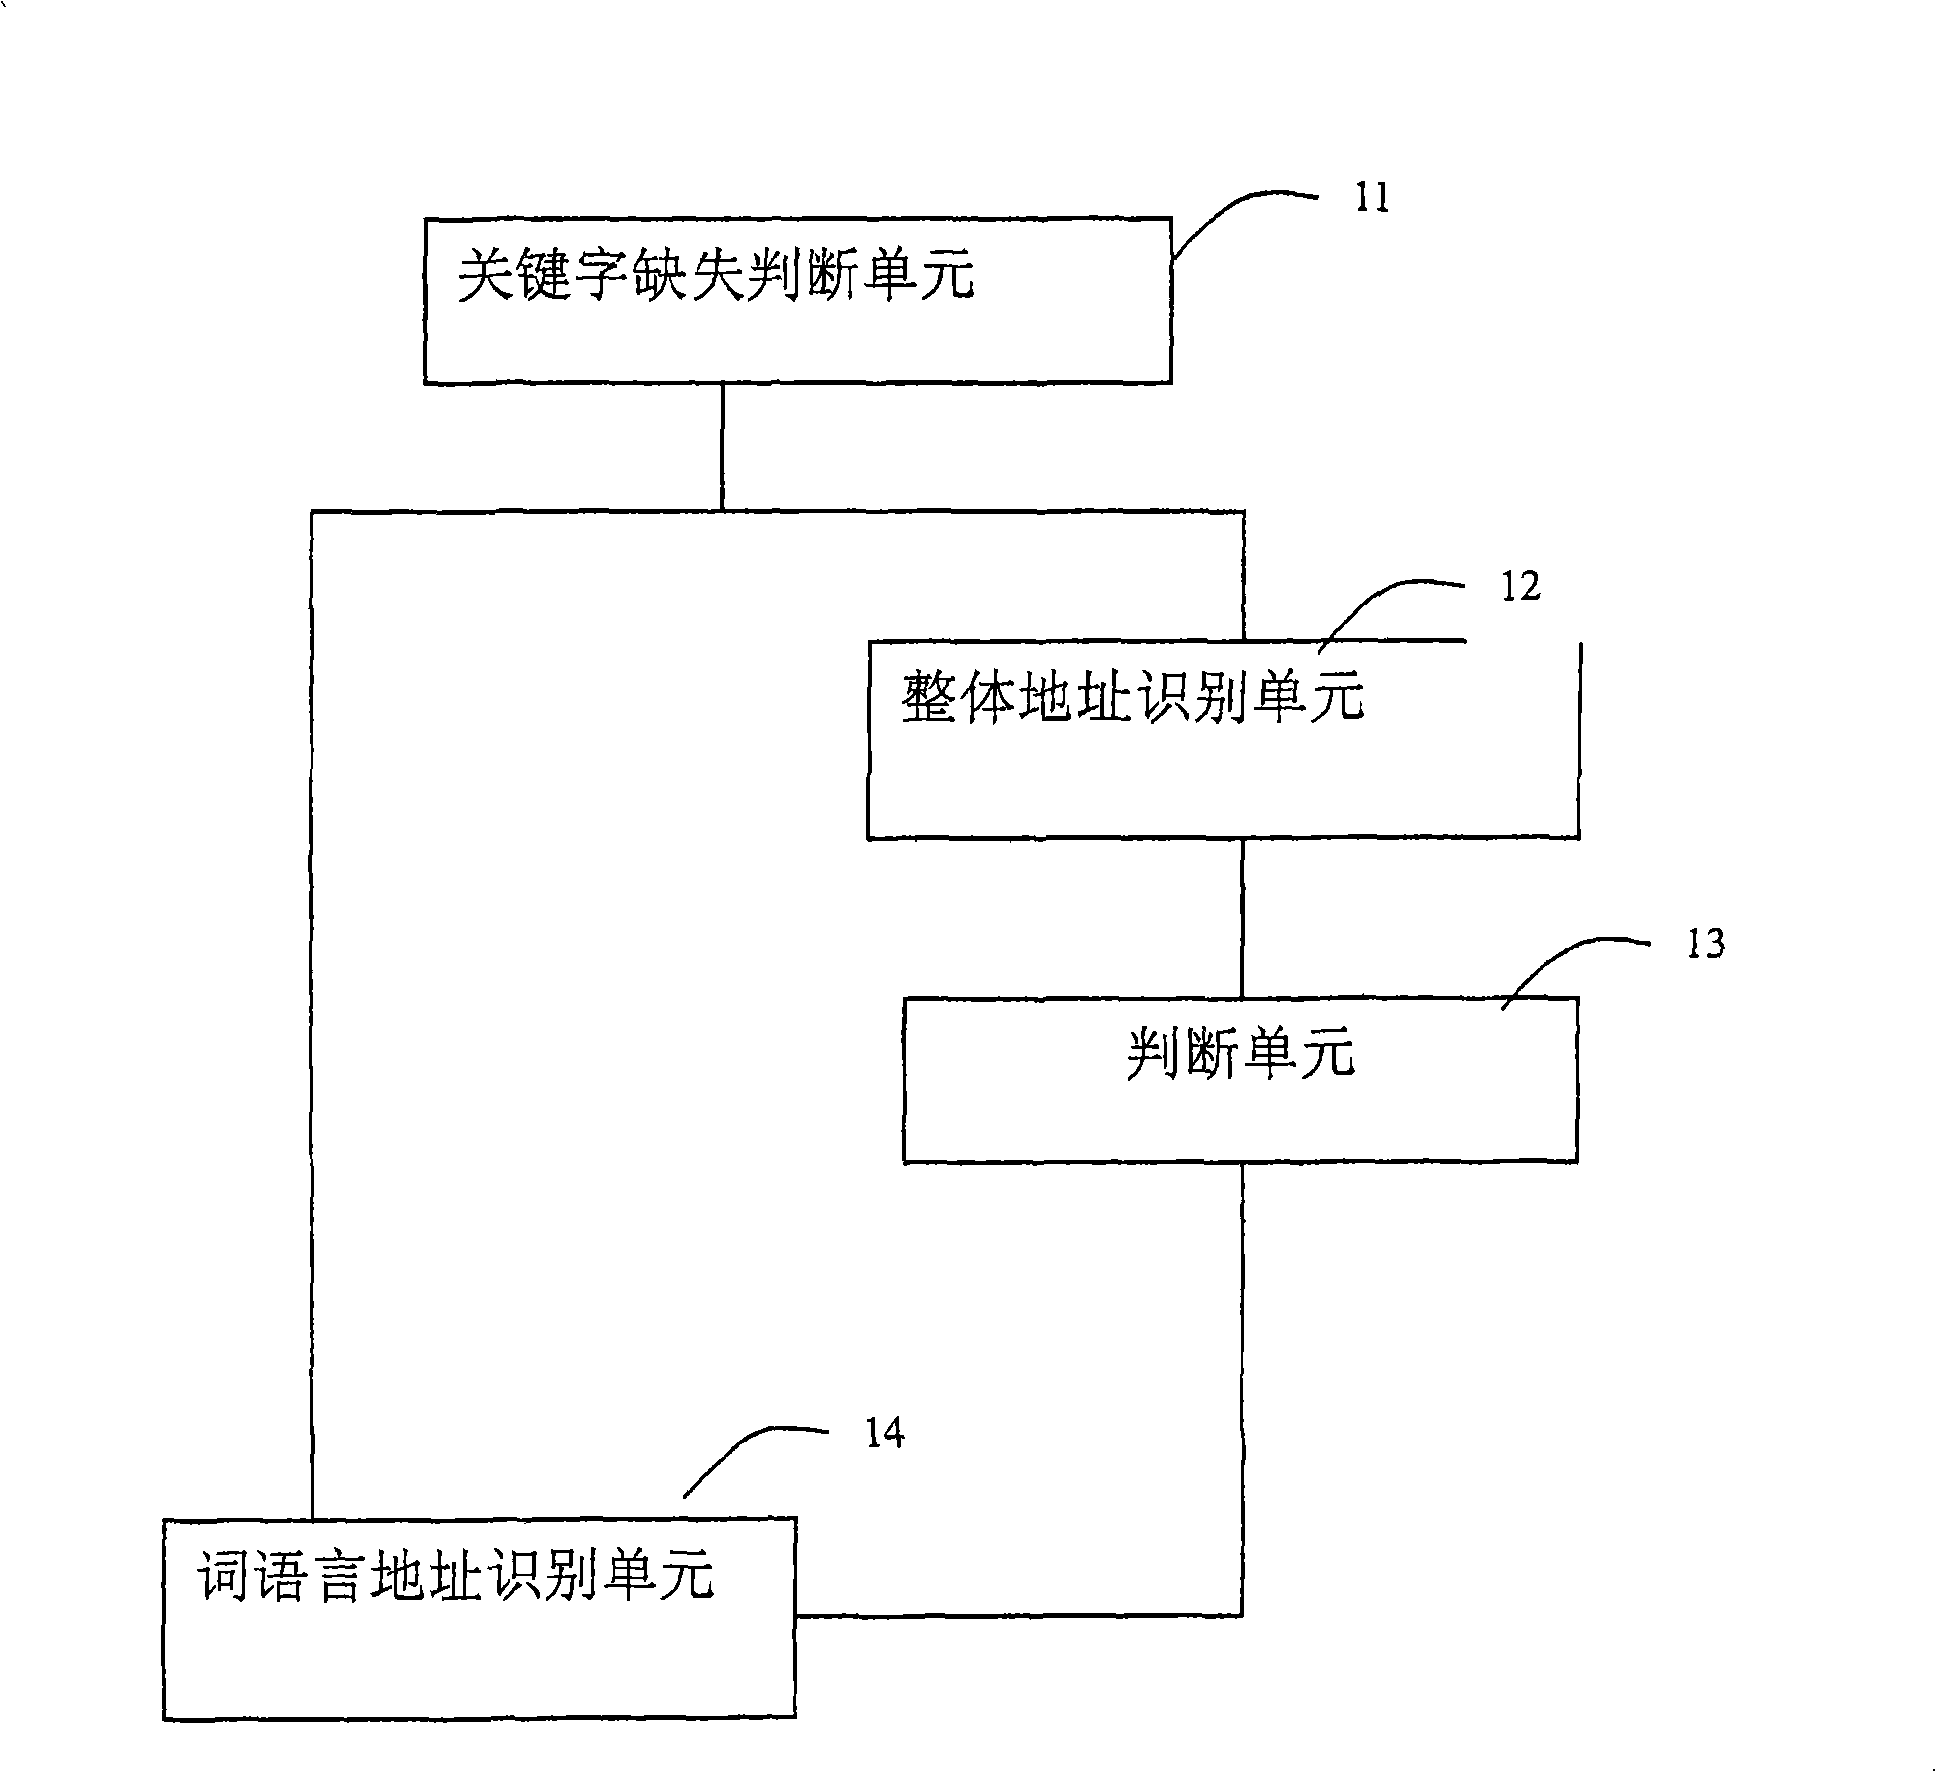 Address recognition device